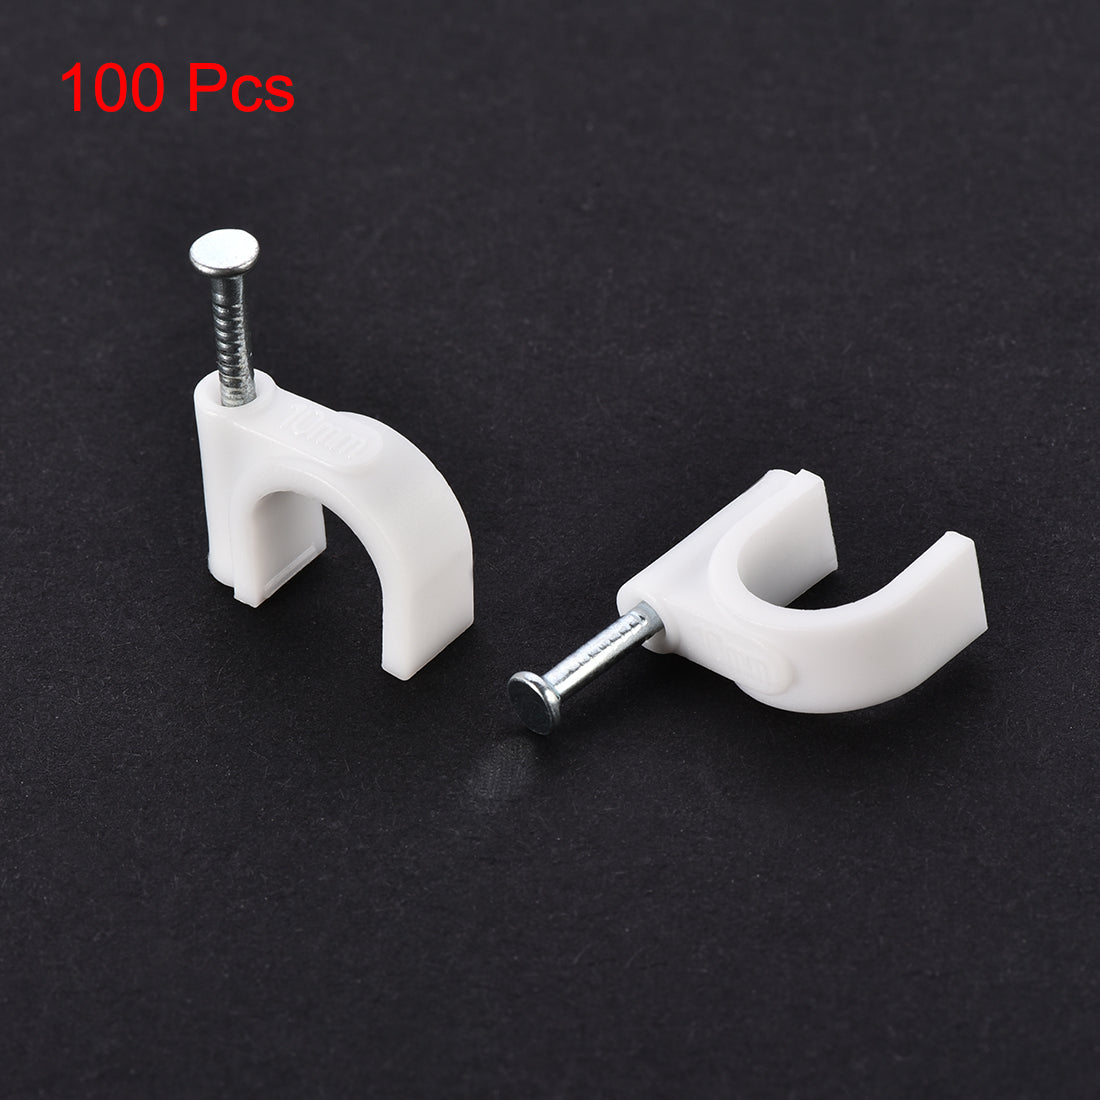 uxcell Uxcell Nail Cable Clips Wire Holder Round Fastener 10mm Clamps for Home Office Cords Management White 100Pcs